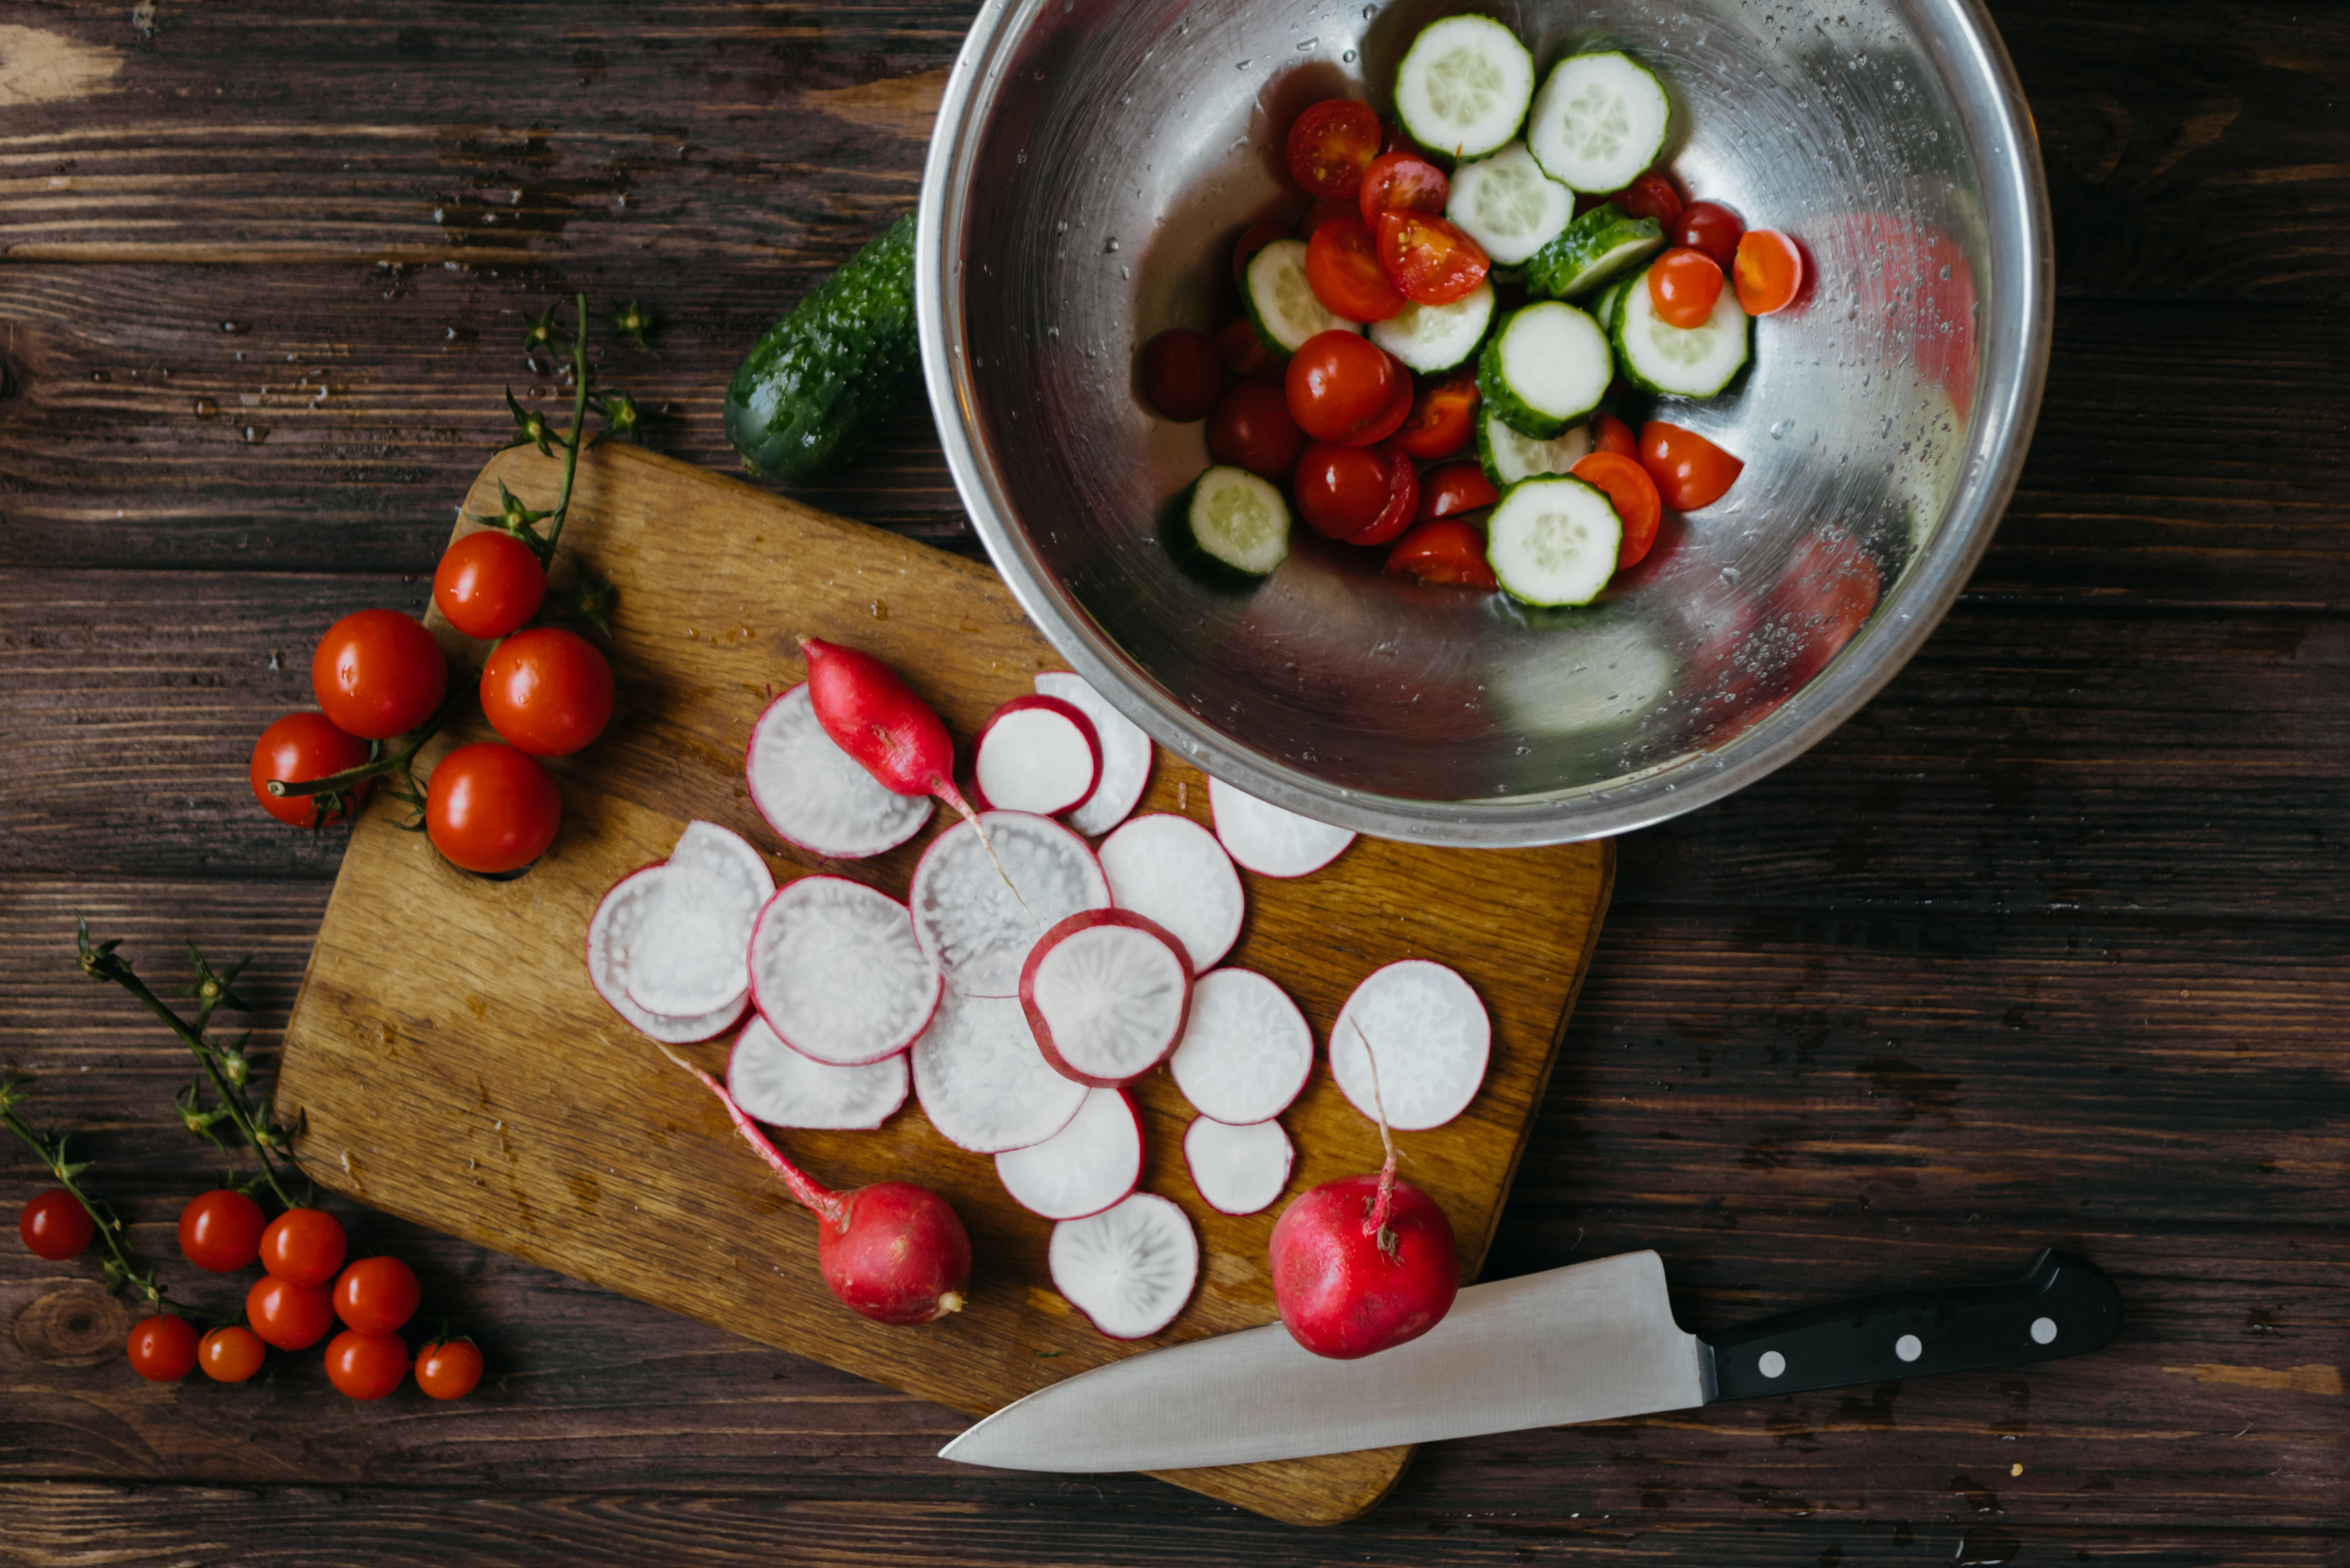 Radishes on a cutting board next to a bowl with cucumbers and tomatoes